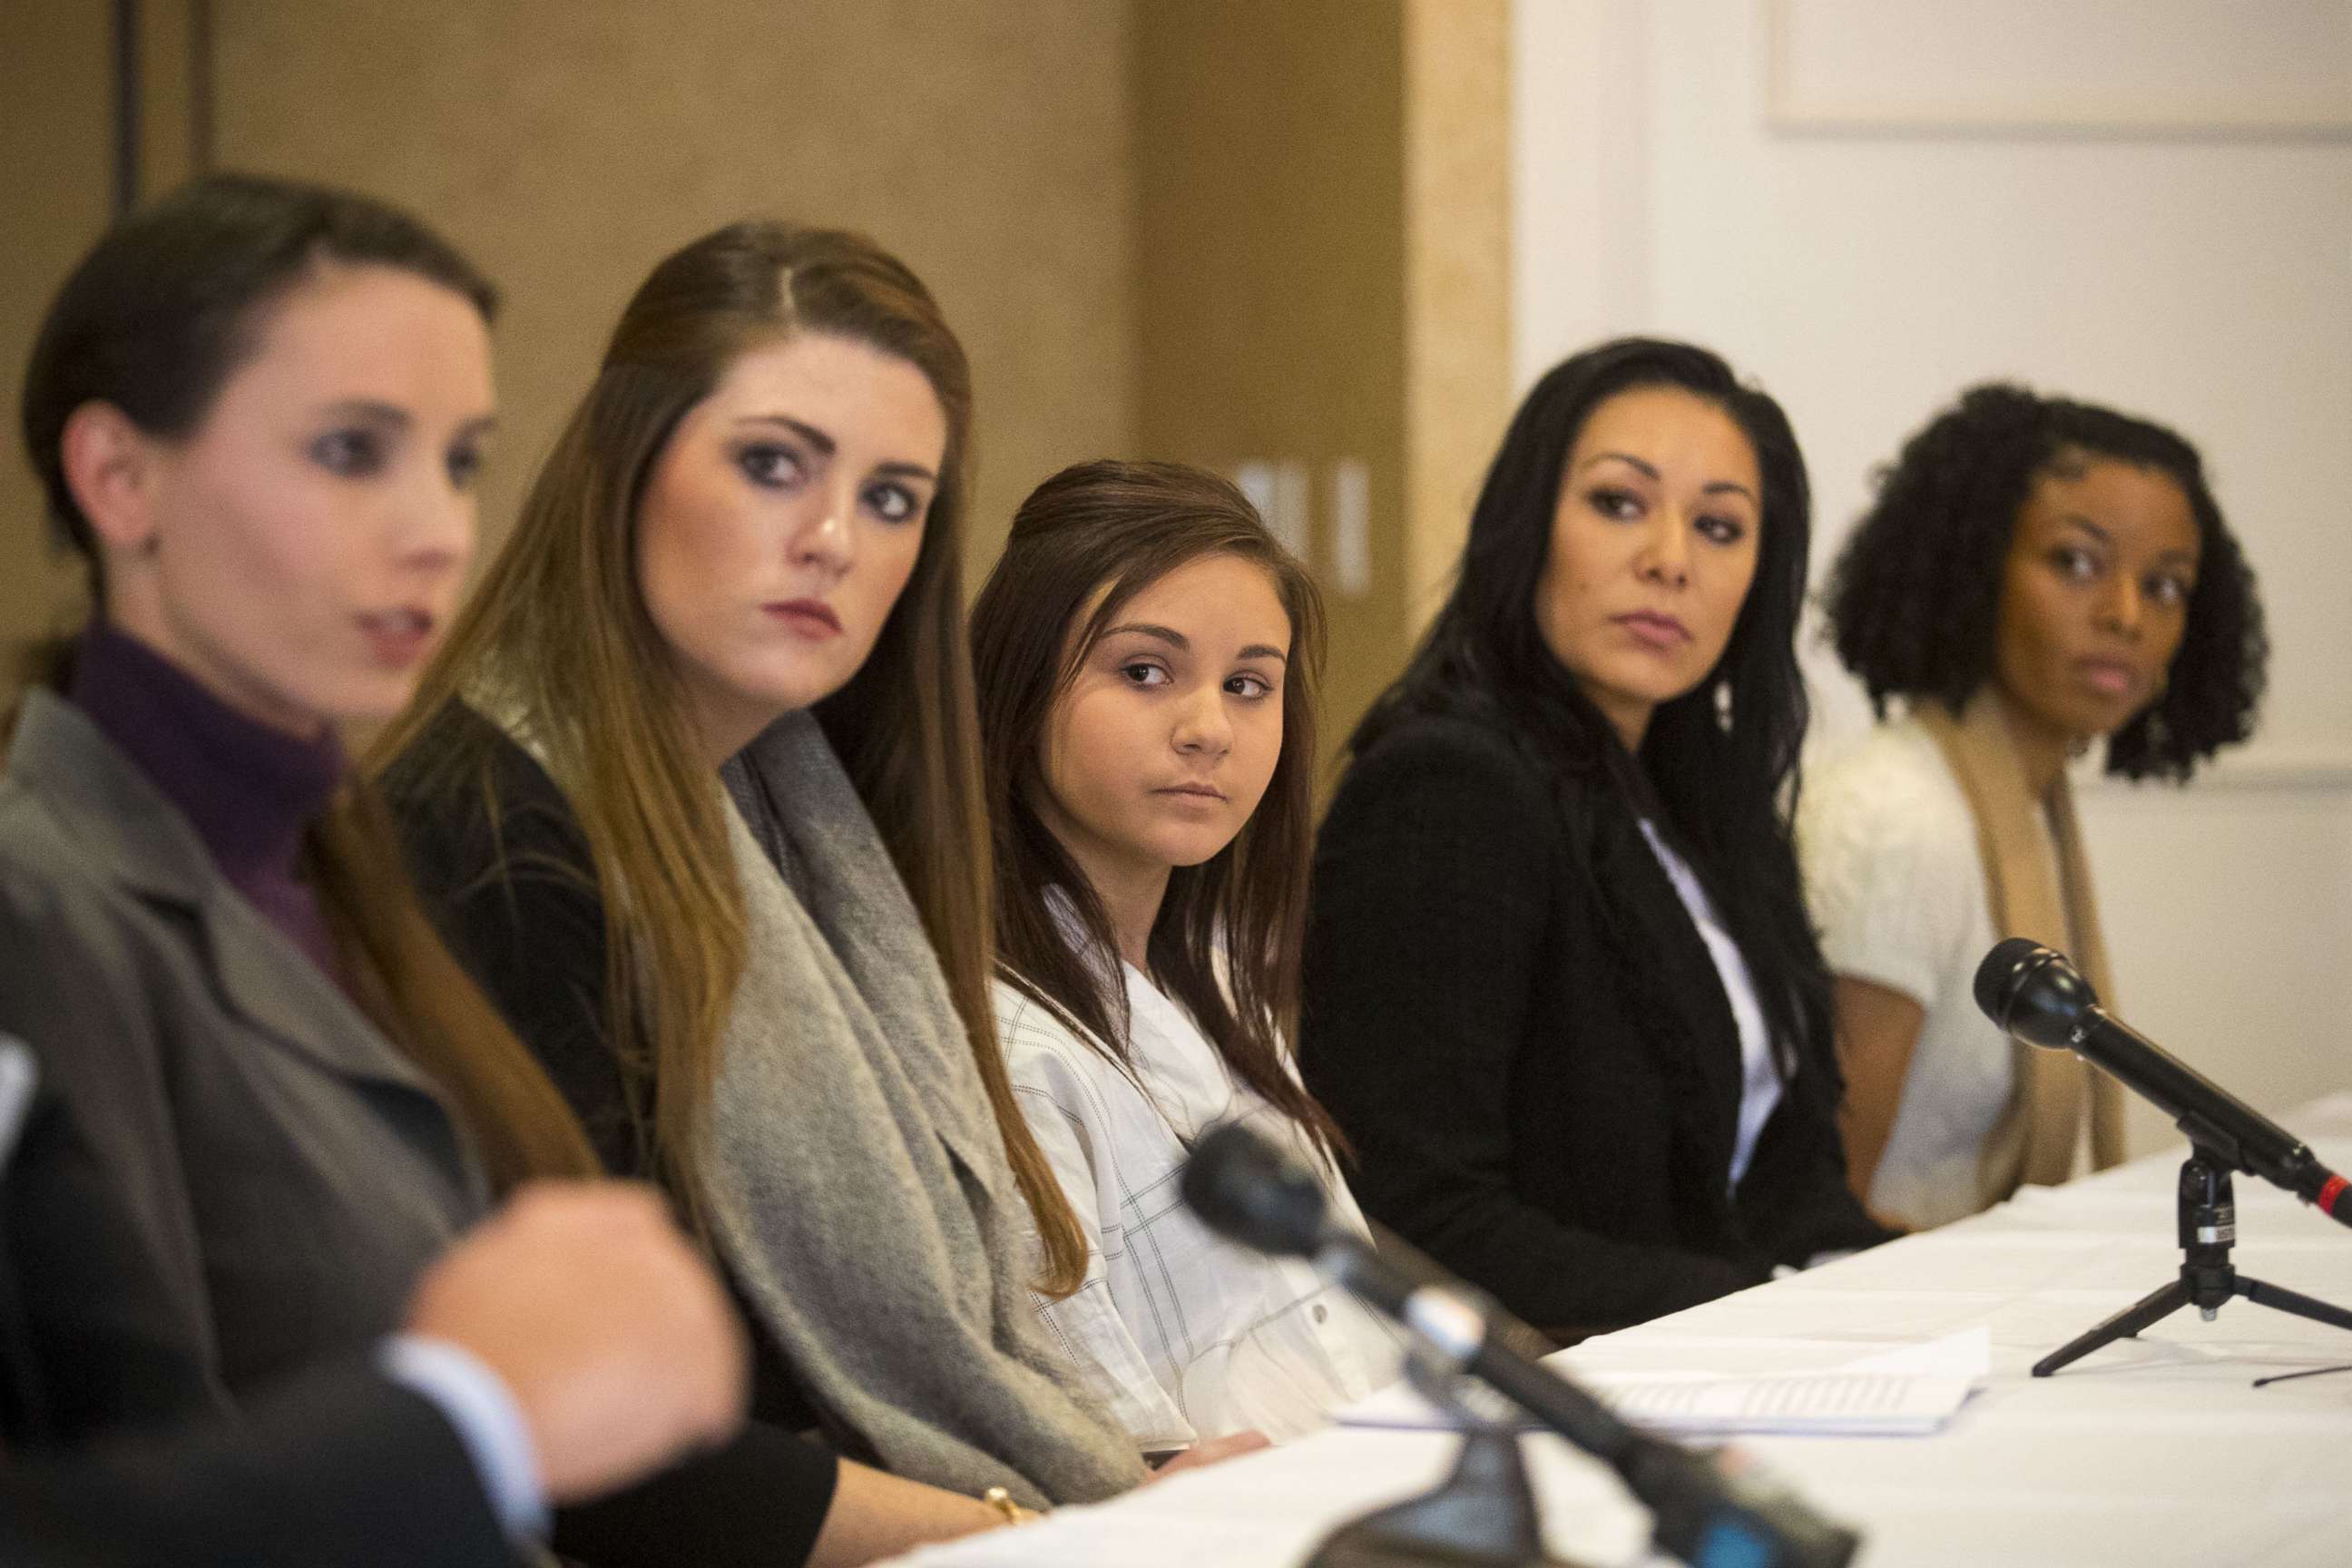 PHOTO: (L-) Rachael Denhollander, Sterling Riethman, Kaylee Lorincz, Jeanette Antolin and Tiffany Thomas appear at a press conference after Larry Nassar was sentenced to 60 years in prison on child pornography charges in Grand Rapids, Mich., Dec. 7, 2017.